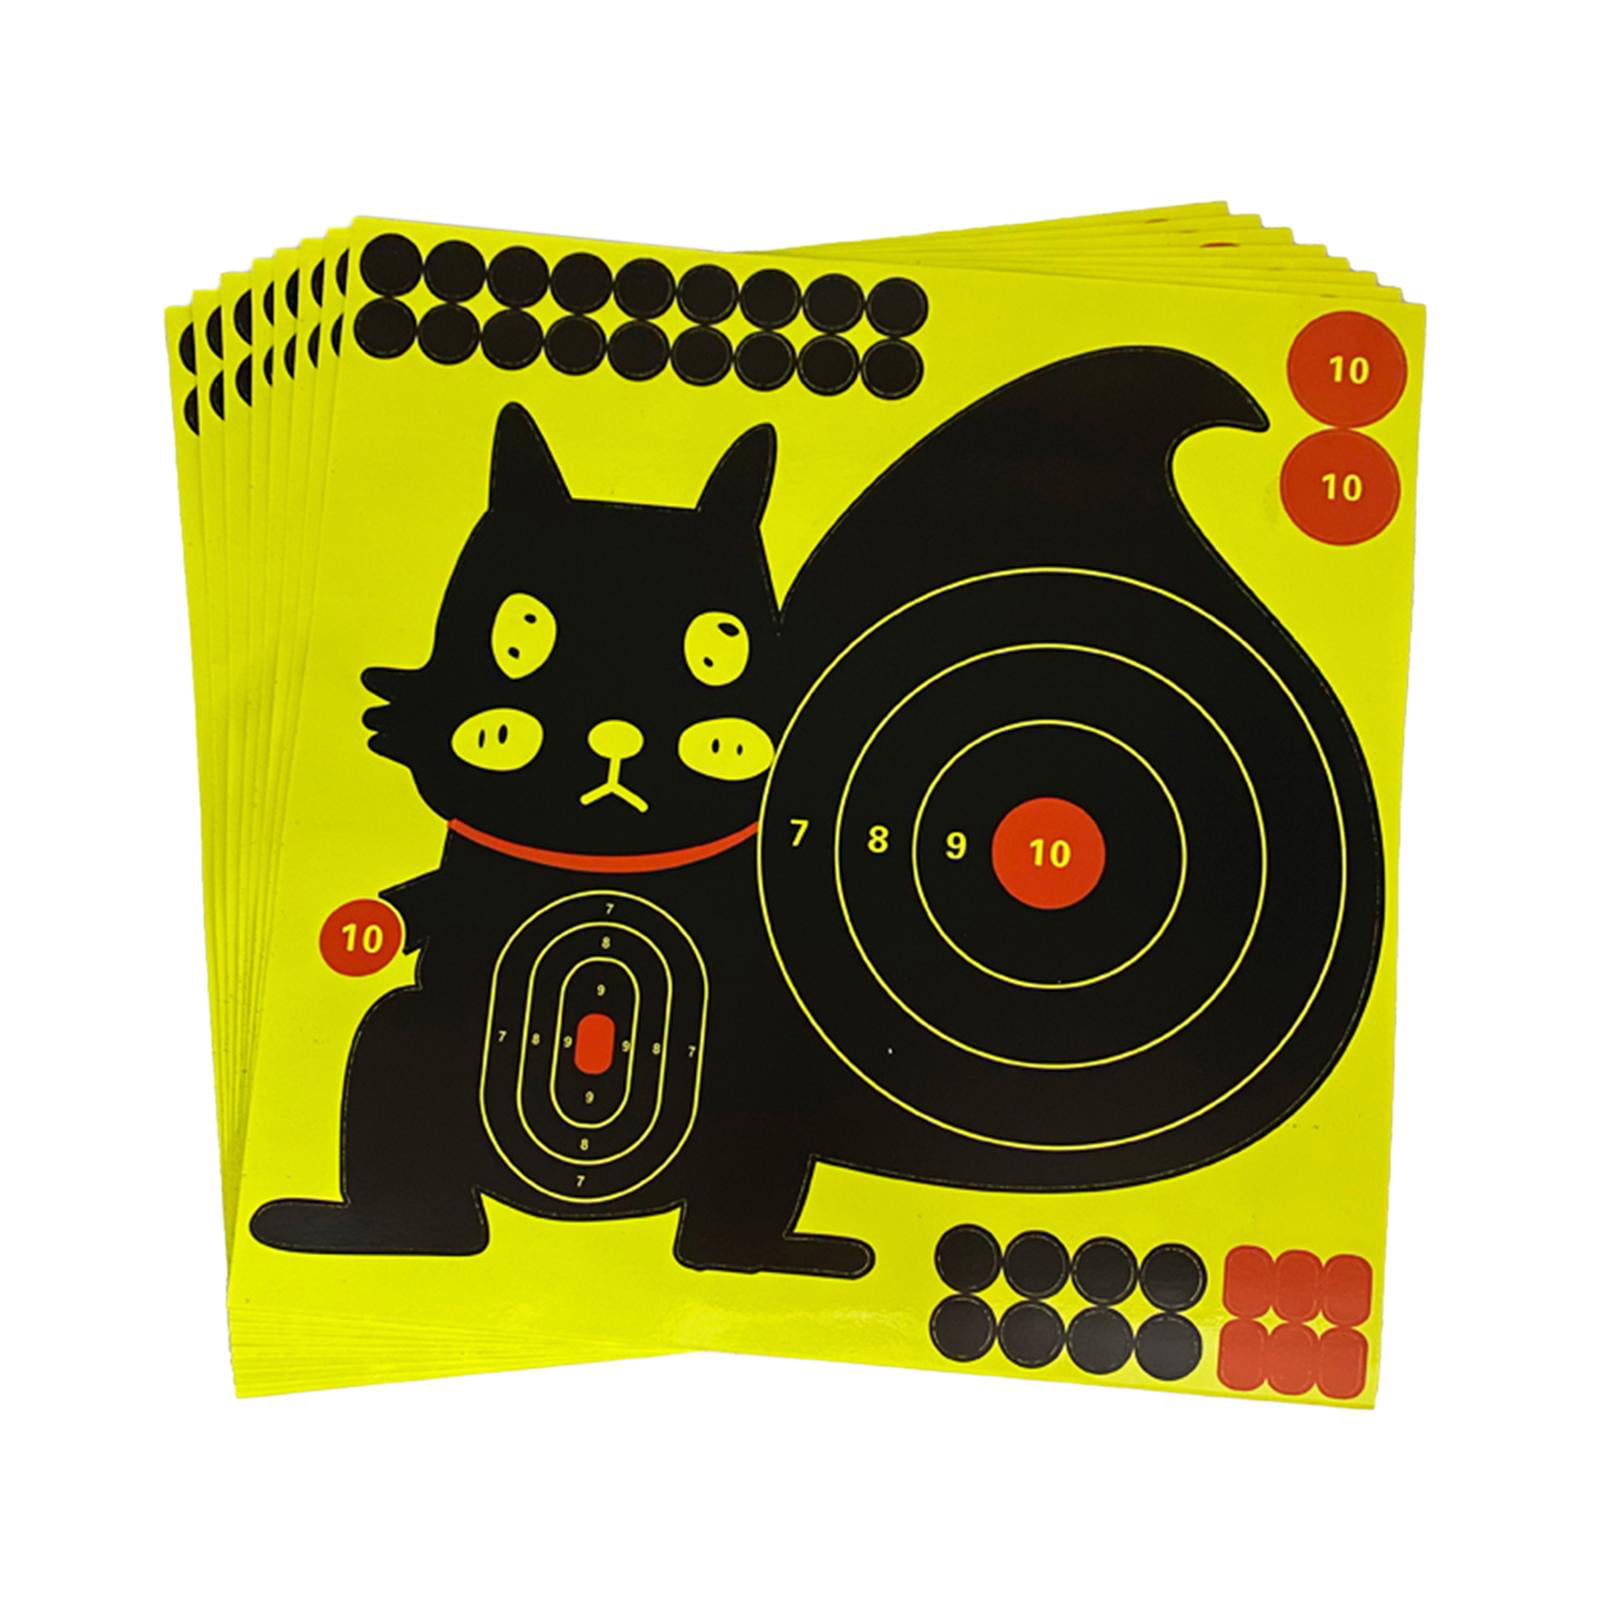 Details about   10 Sheet/160Pcs Paper Targets Self Adhesive Reactive Splatter Shooting Stickers 